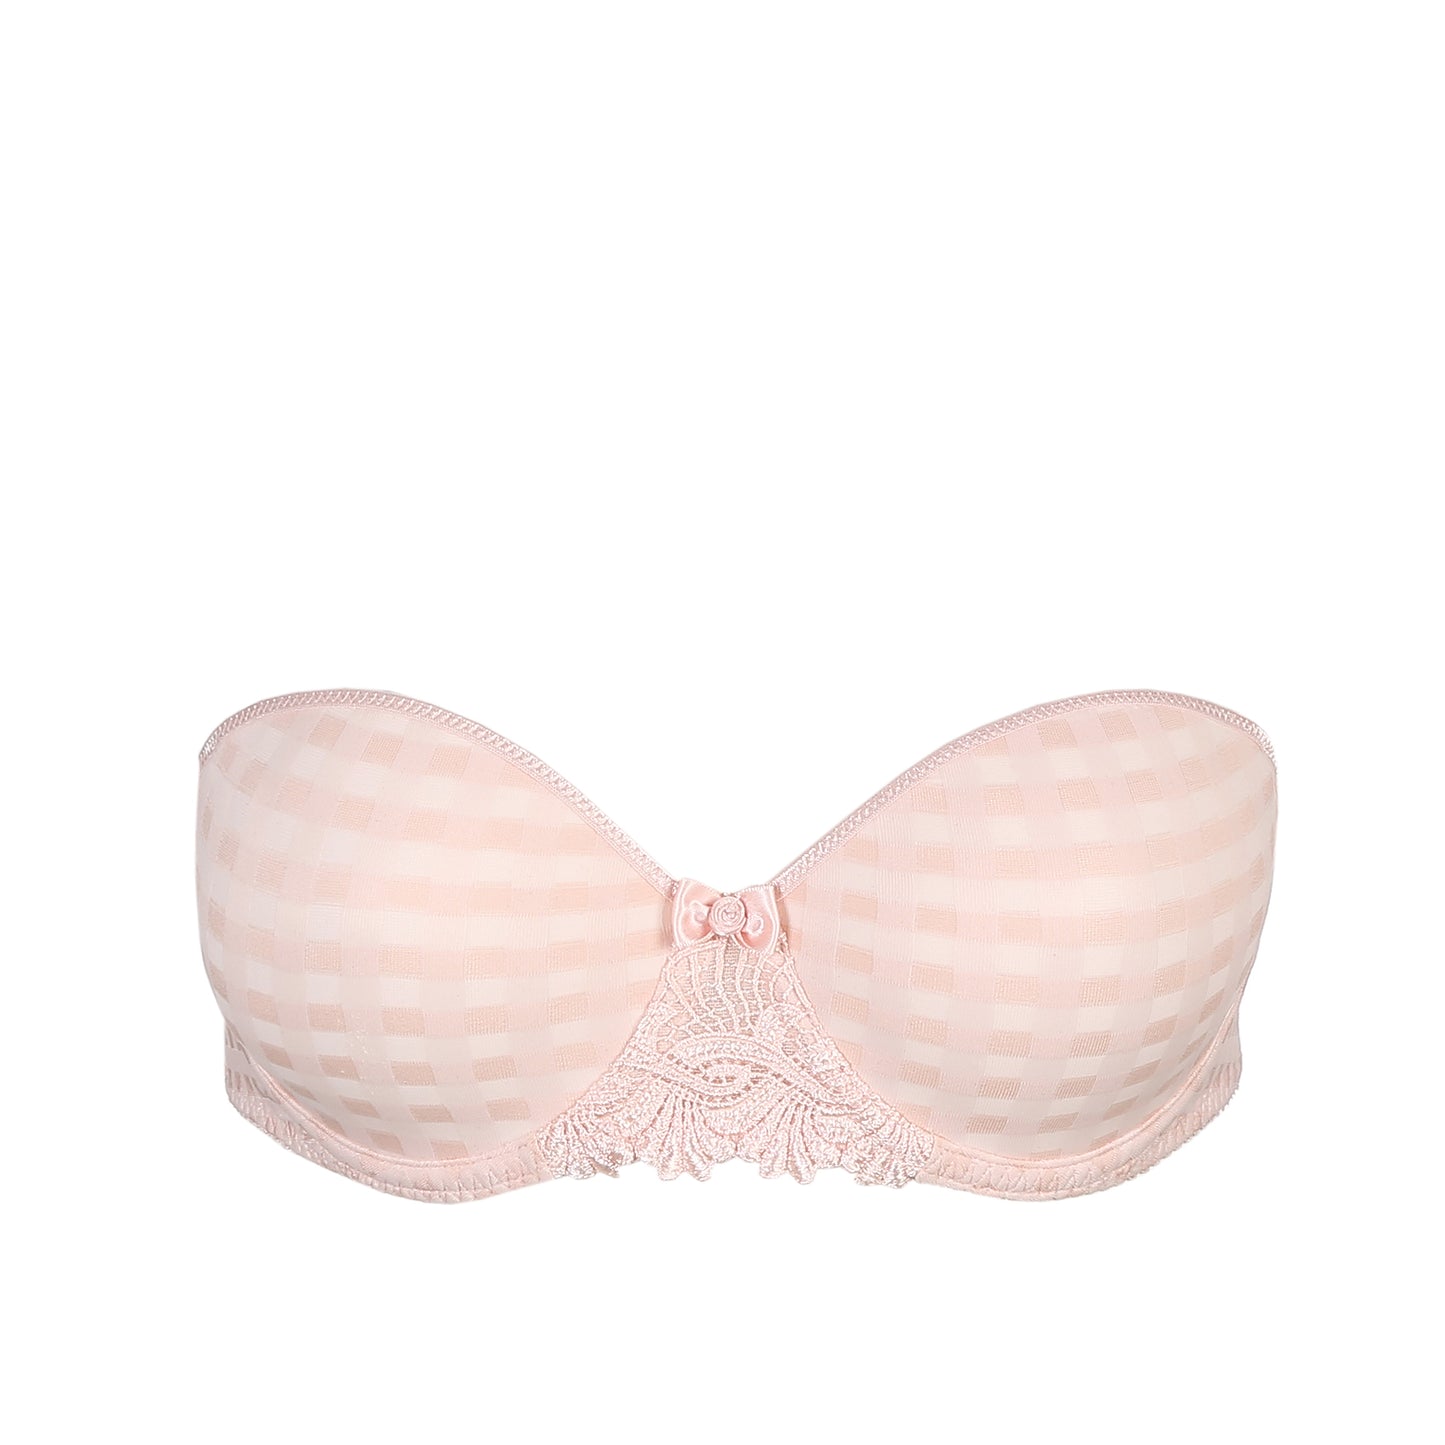 Marie Jo Avero voorgevormde bh - strapless pearly pink